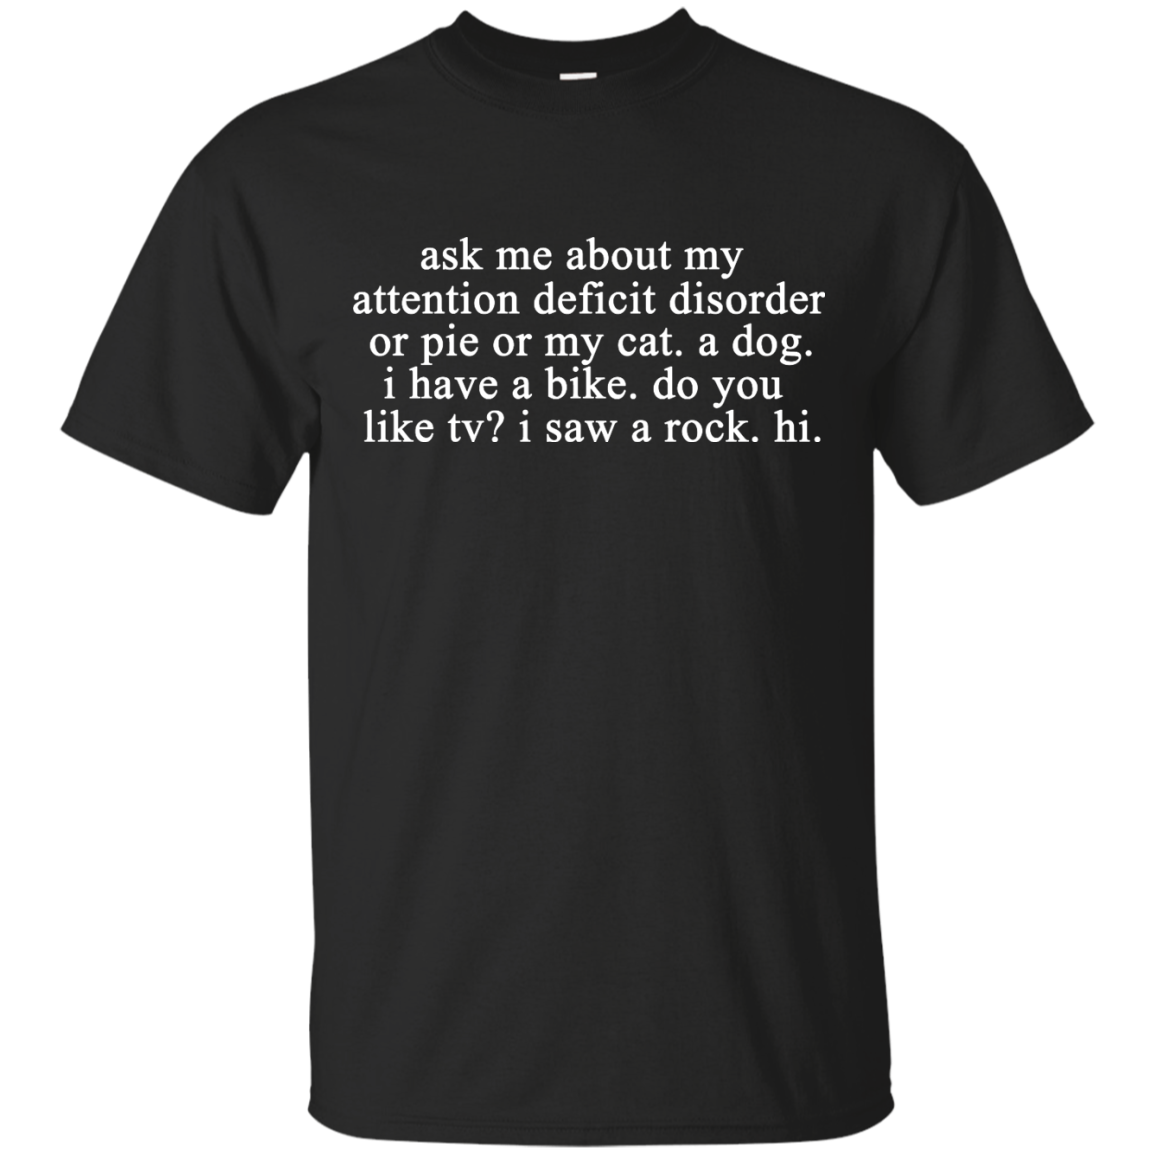 Ask me about my attention deficit disorder shirt, hoodie, tank